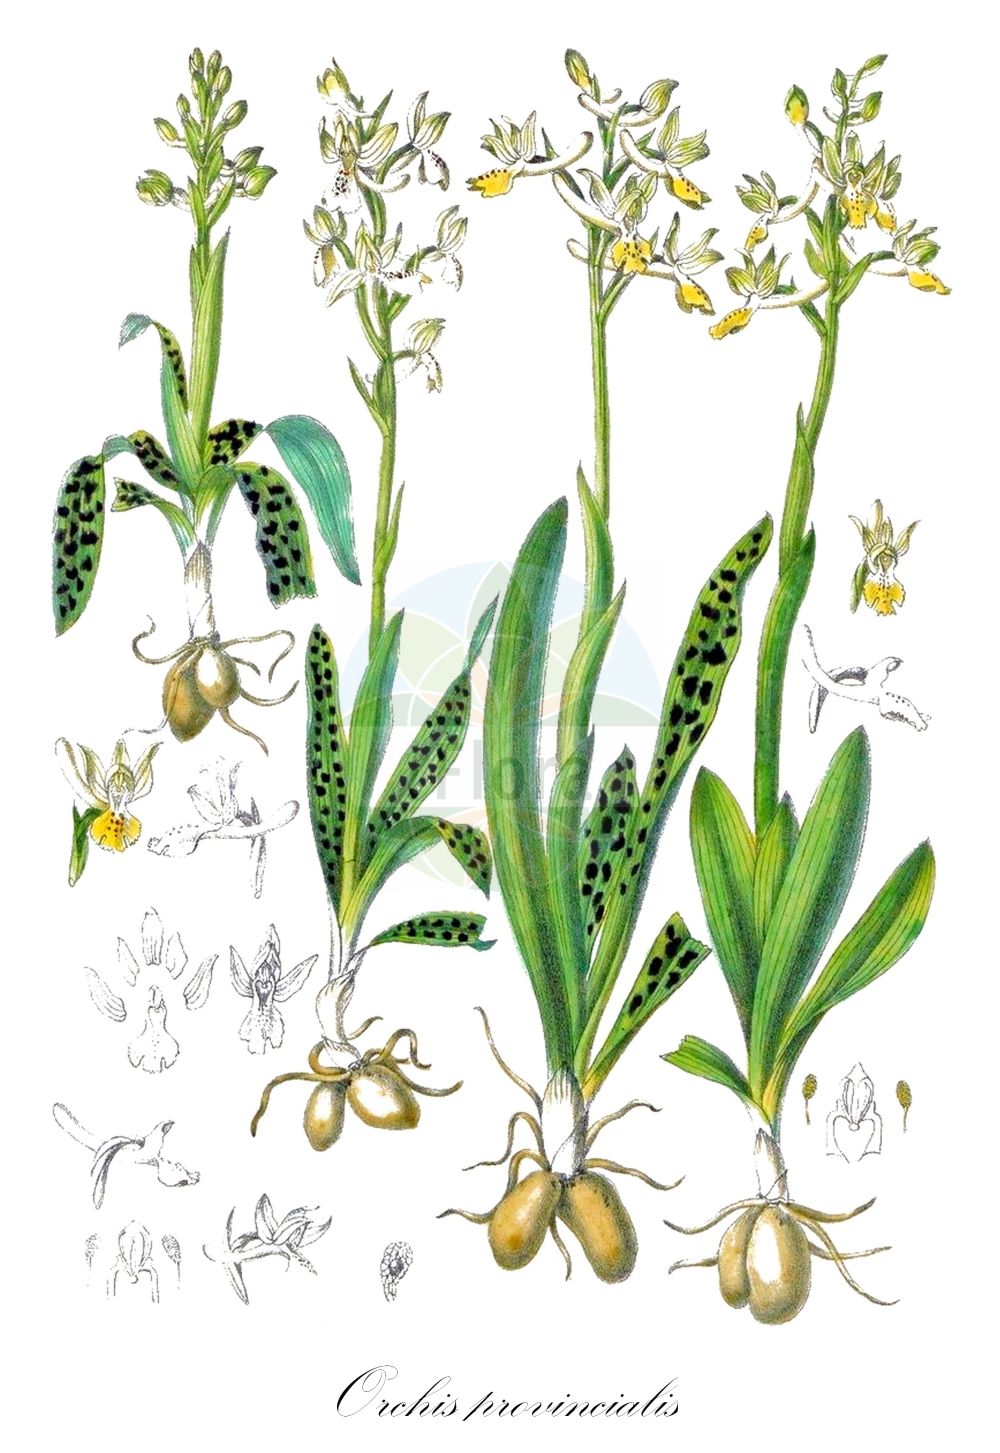 Historische Abbildung von Orchis provincialis. Das Bild zeigt Blatt, Bluete, Frucht und Same. ---- Historical Drawing of Orchis provincialis. The image is showing leaf, flower, fruit and seed.(Orchis provincialis,Androrchis provincialis,Orchis cyrilli,Orchis leucostachya,Orchis mascula,Orchis olbiensis,Orchis pallens,Orchis provincialis,Orchis pseudopallens,Orchis,Knabenkraut,Orchidaceae,Knabenkrautgewächse,Orchid family,Blatt,Bluete,Frucht,Same,leaf,flower,fruit,seed,Barla (1868))